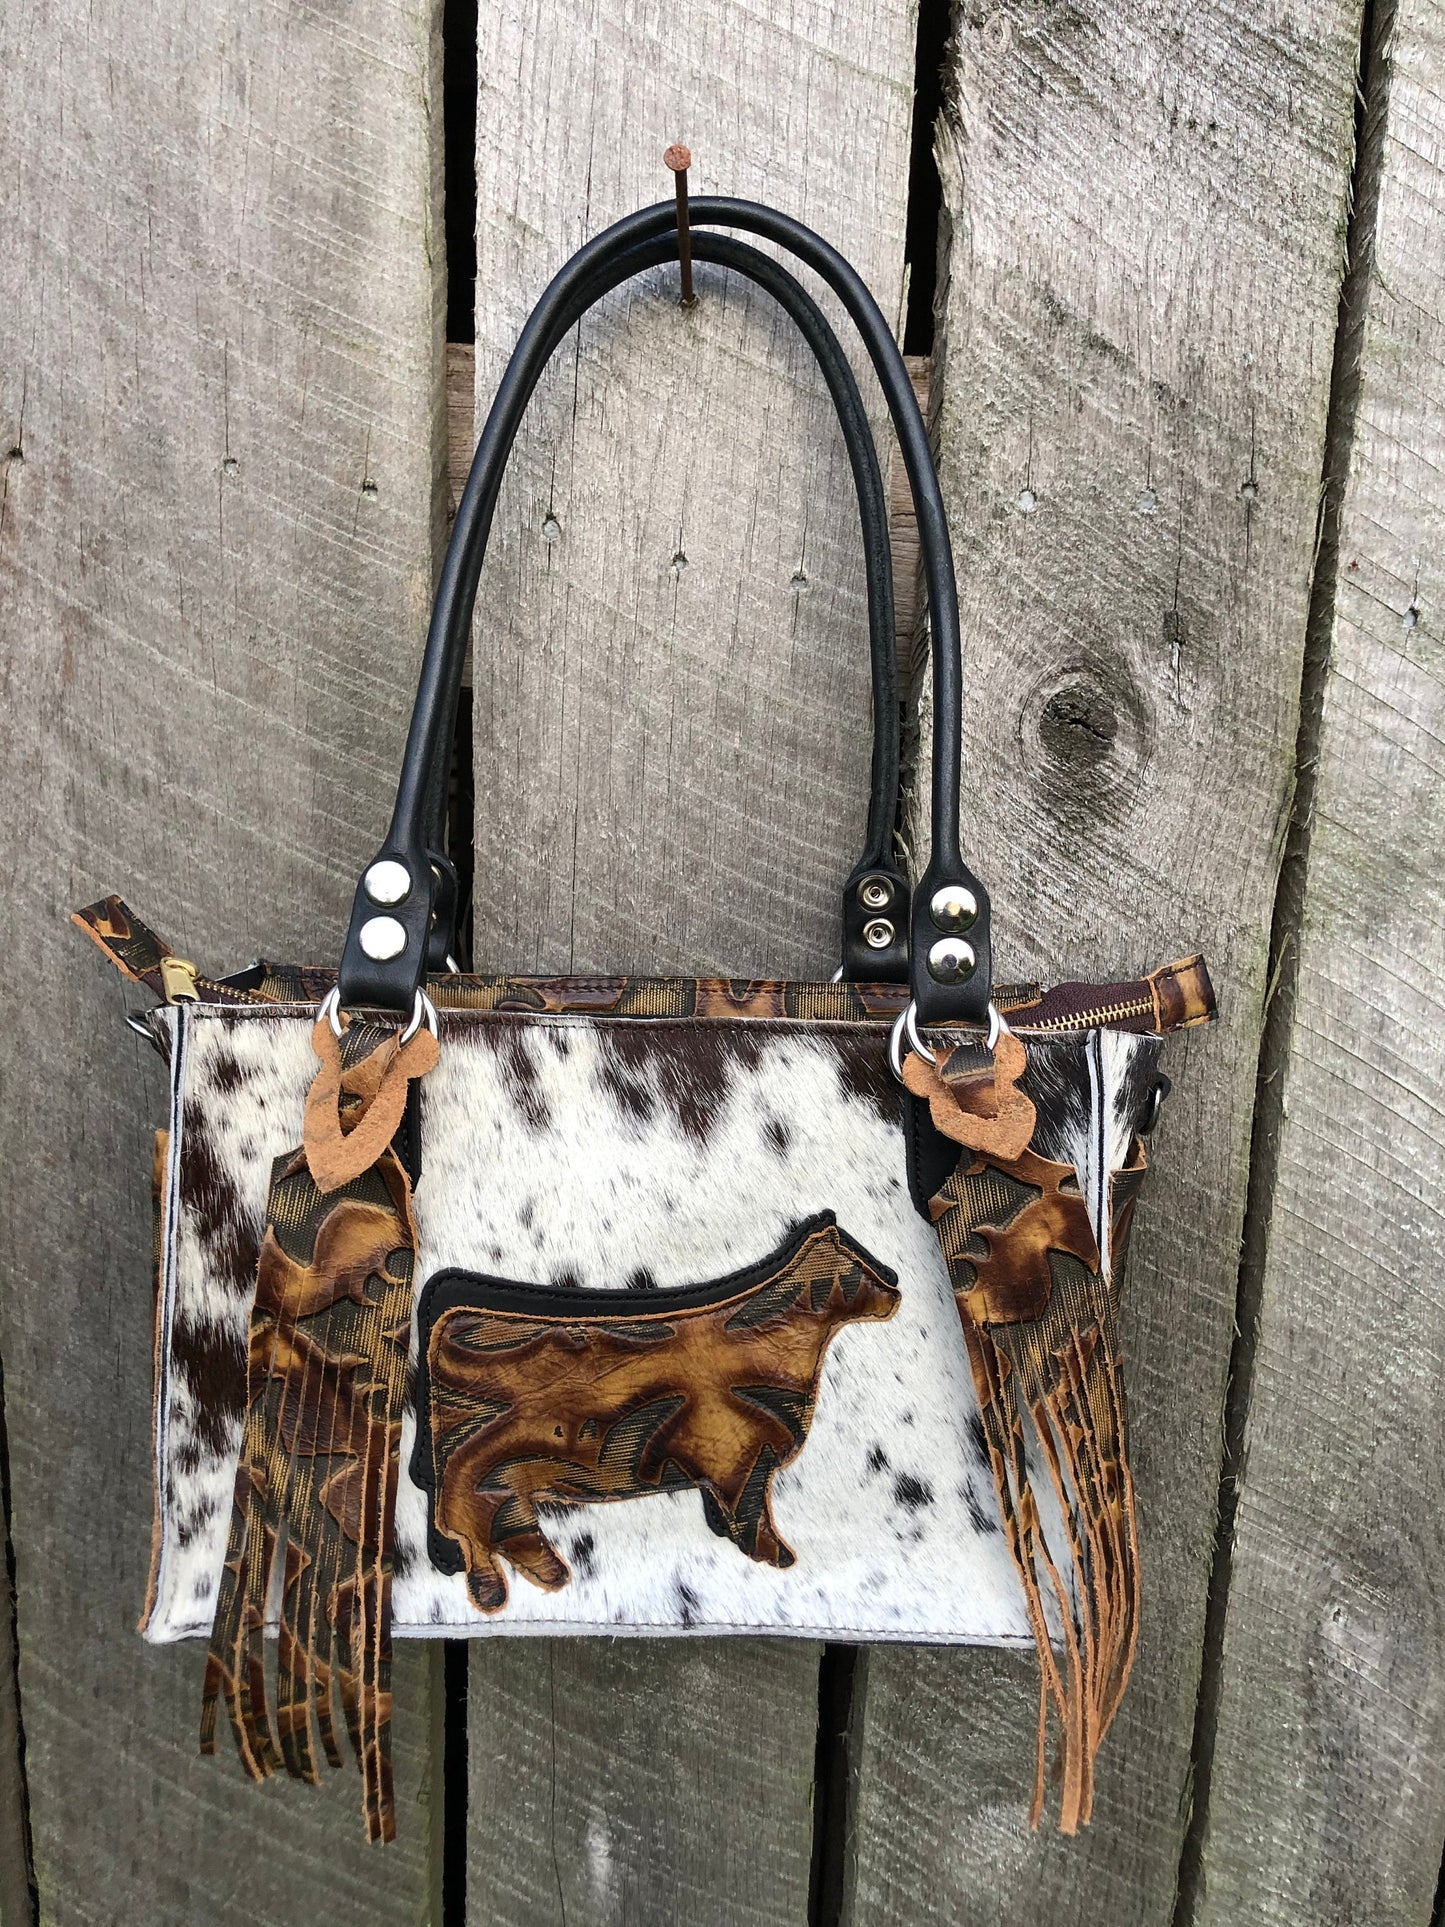 Handmade Mini Tote, Hair On Hide, Cowhide Purse, Cowhide Toto, Leather –  Rising Star Forge and Leather Works